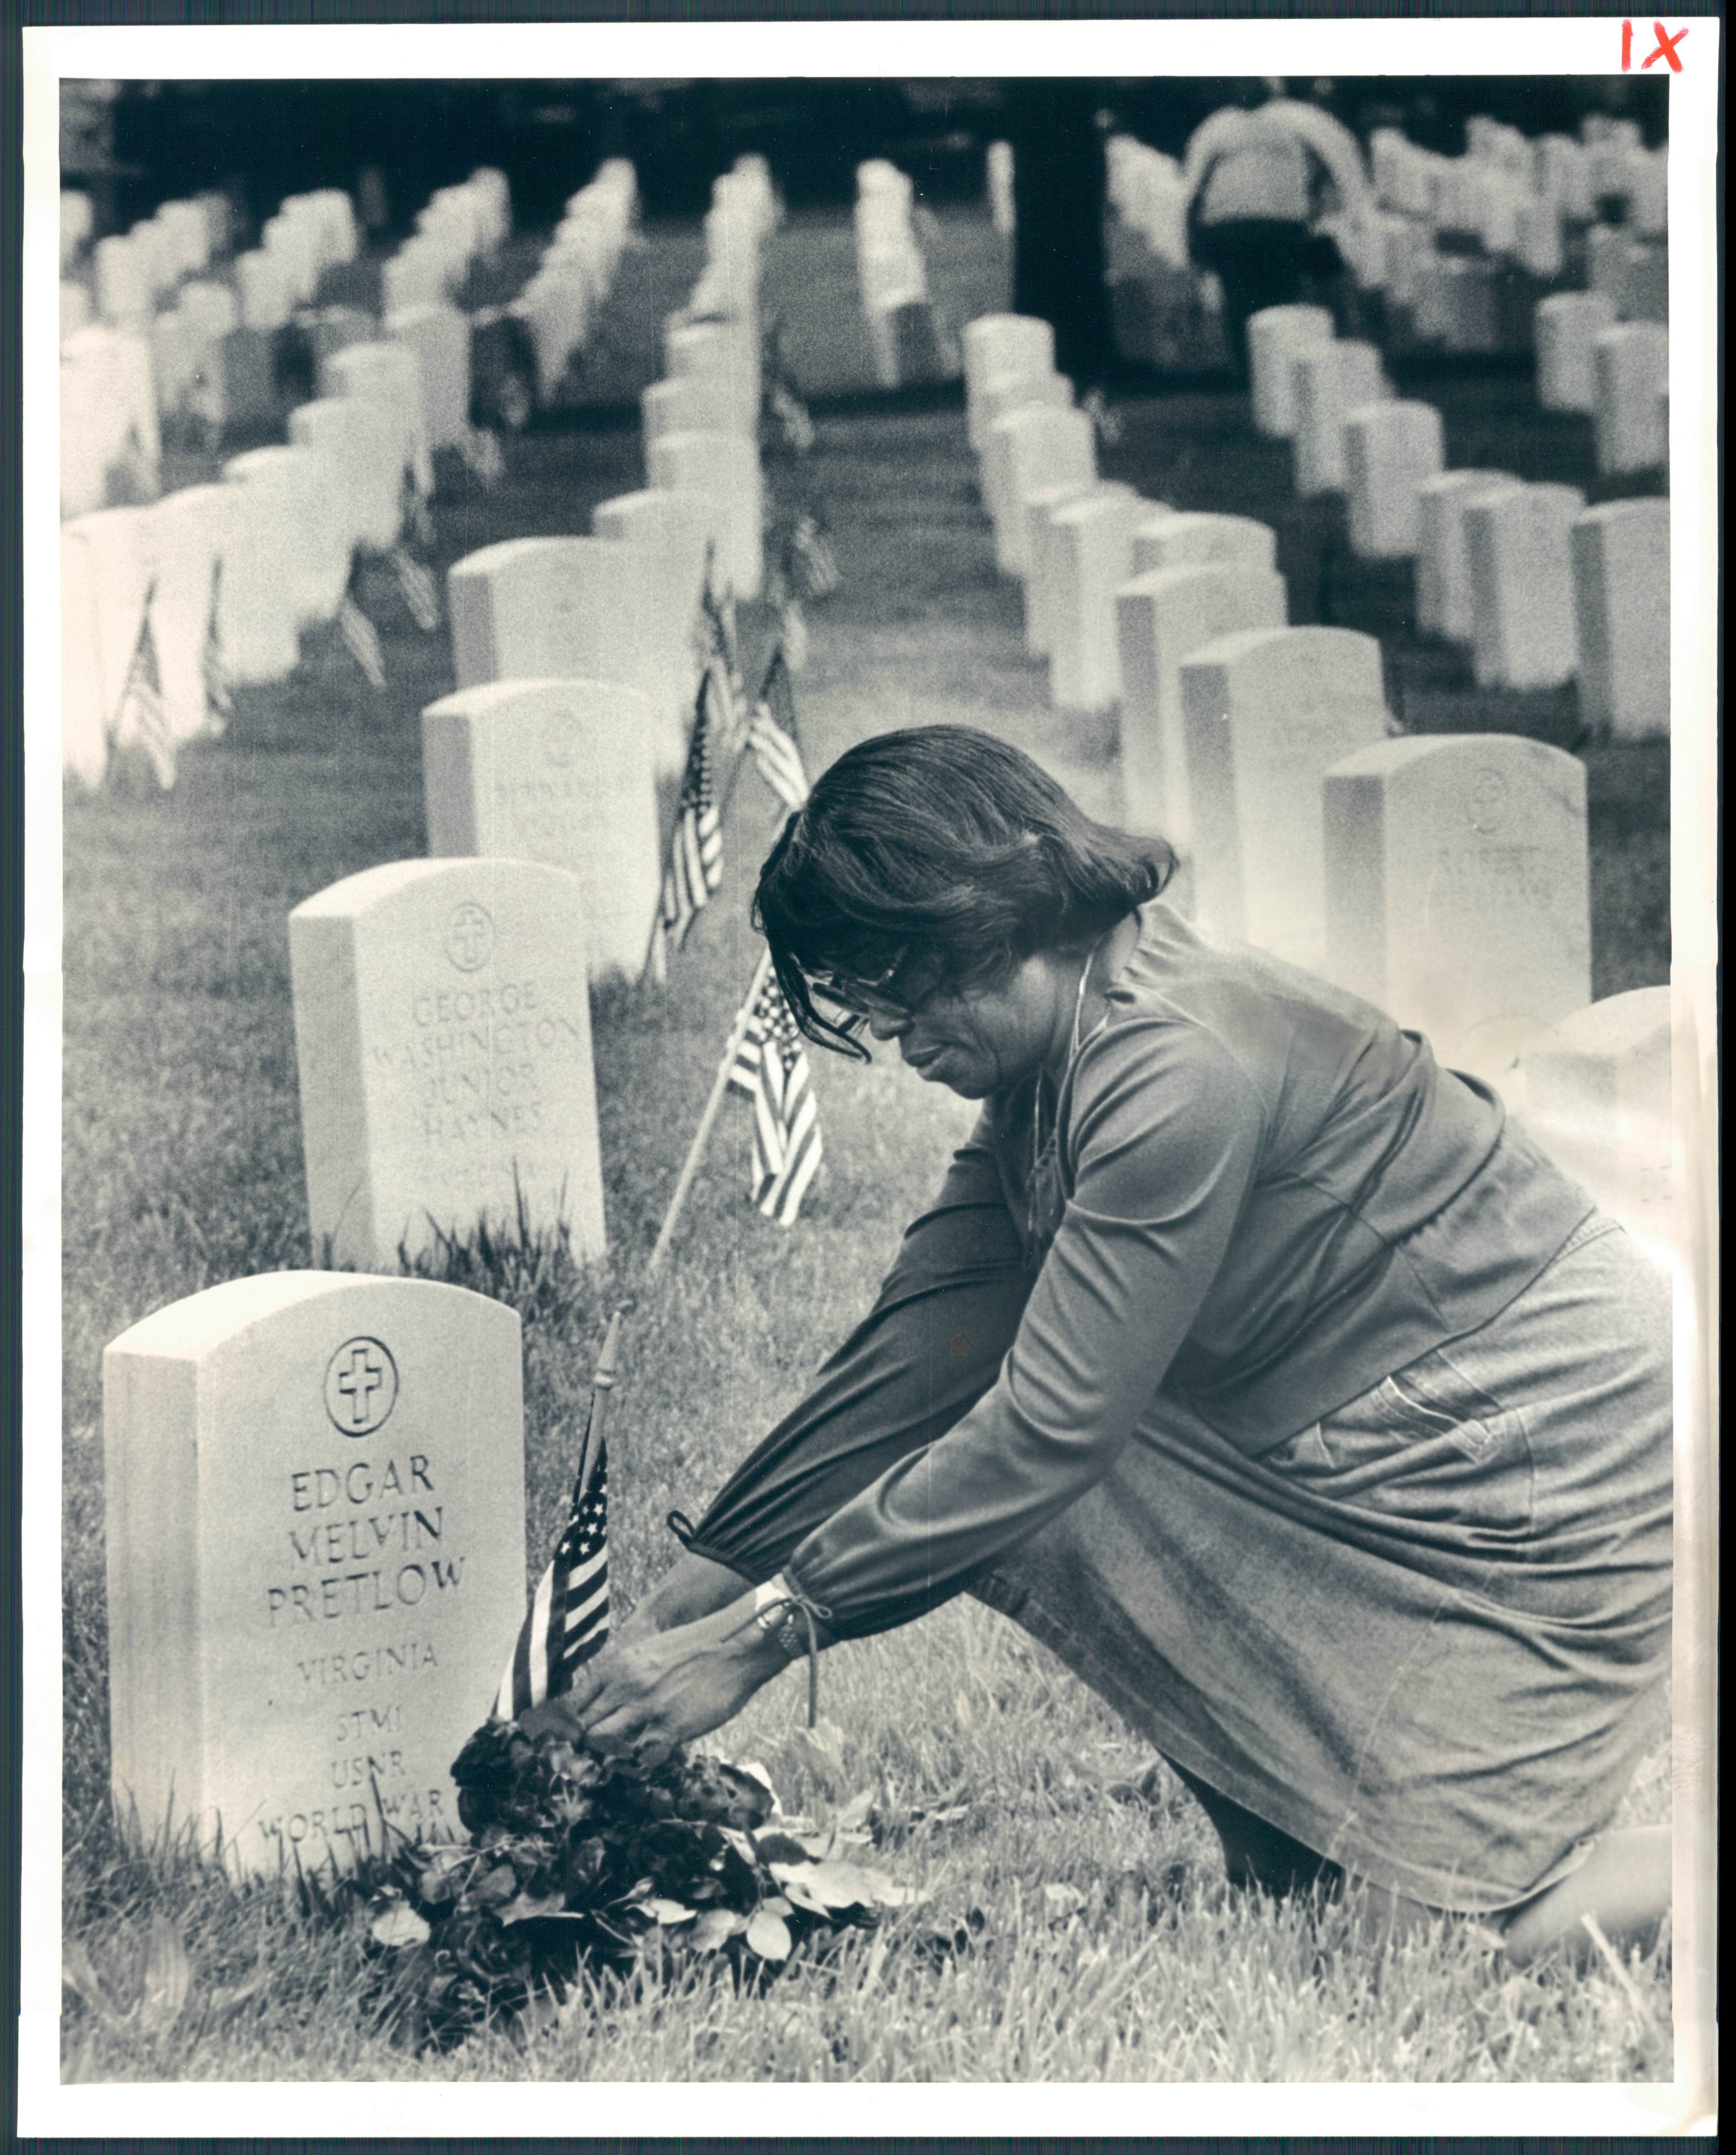 May 31, 1983 - MEMORIAL DAY -- Ethel Heartwell Pretlow arranges flowers on her husband's grave in Baltimore National Cemetery on Frederick Road. Edgar Melvin Pretlow served in the Navy during World War II and died in 1964. Photo by Walter M. McCardell ACP-797-BSDate Created: 1983-05-31 Copyright Notice: Baltimore Sun Folder Description: Memorial Day Celebrations (3) Folder Extended Description: 318-4 | Title: MEMORIAL DAY (3) 319-4 Subject: MEMORIAL DAY